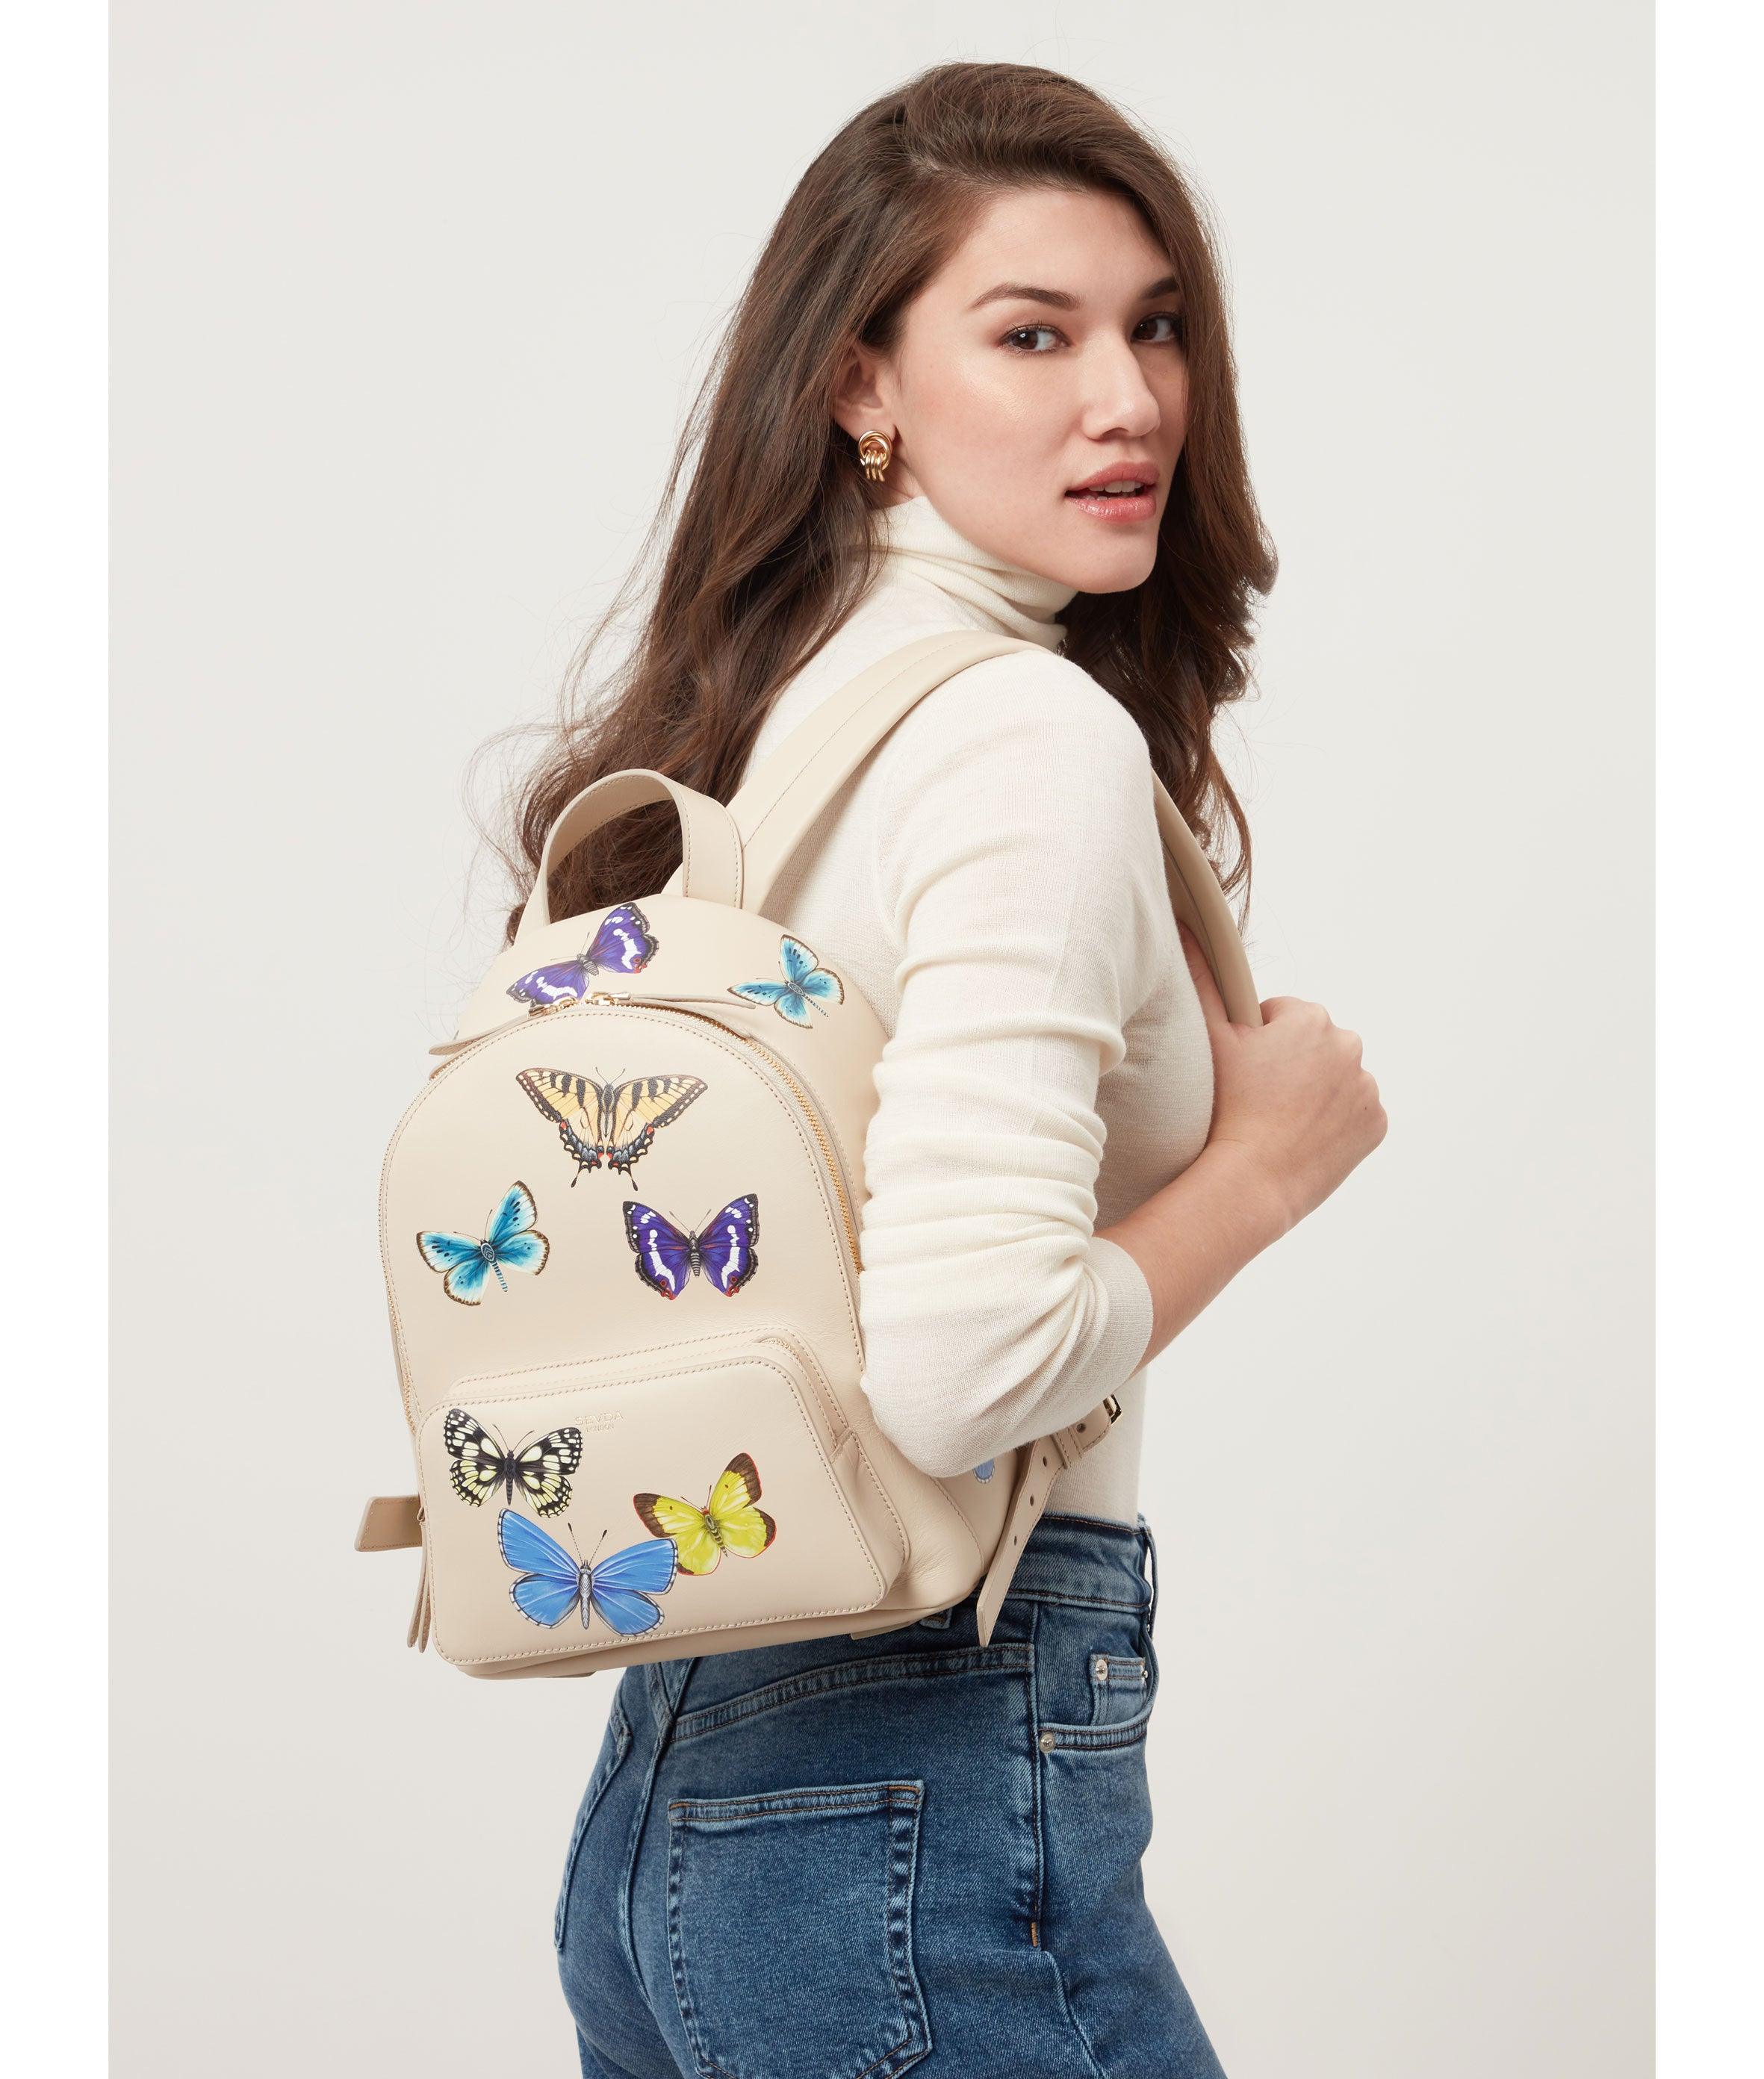 Ivory Backpack with Butterflies Print - The fusion of London's design and Italian craftsmanship.